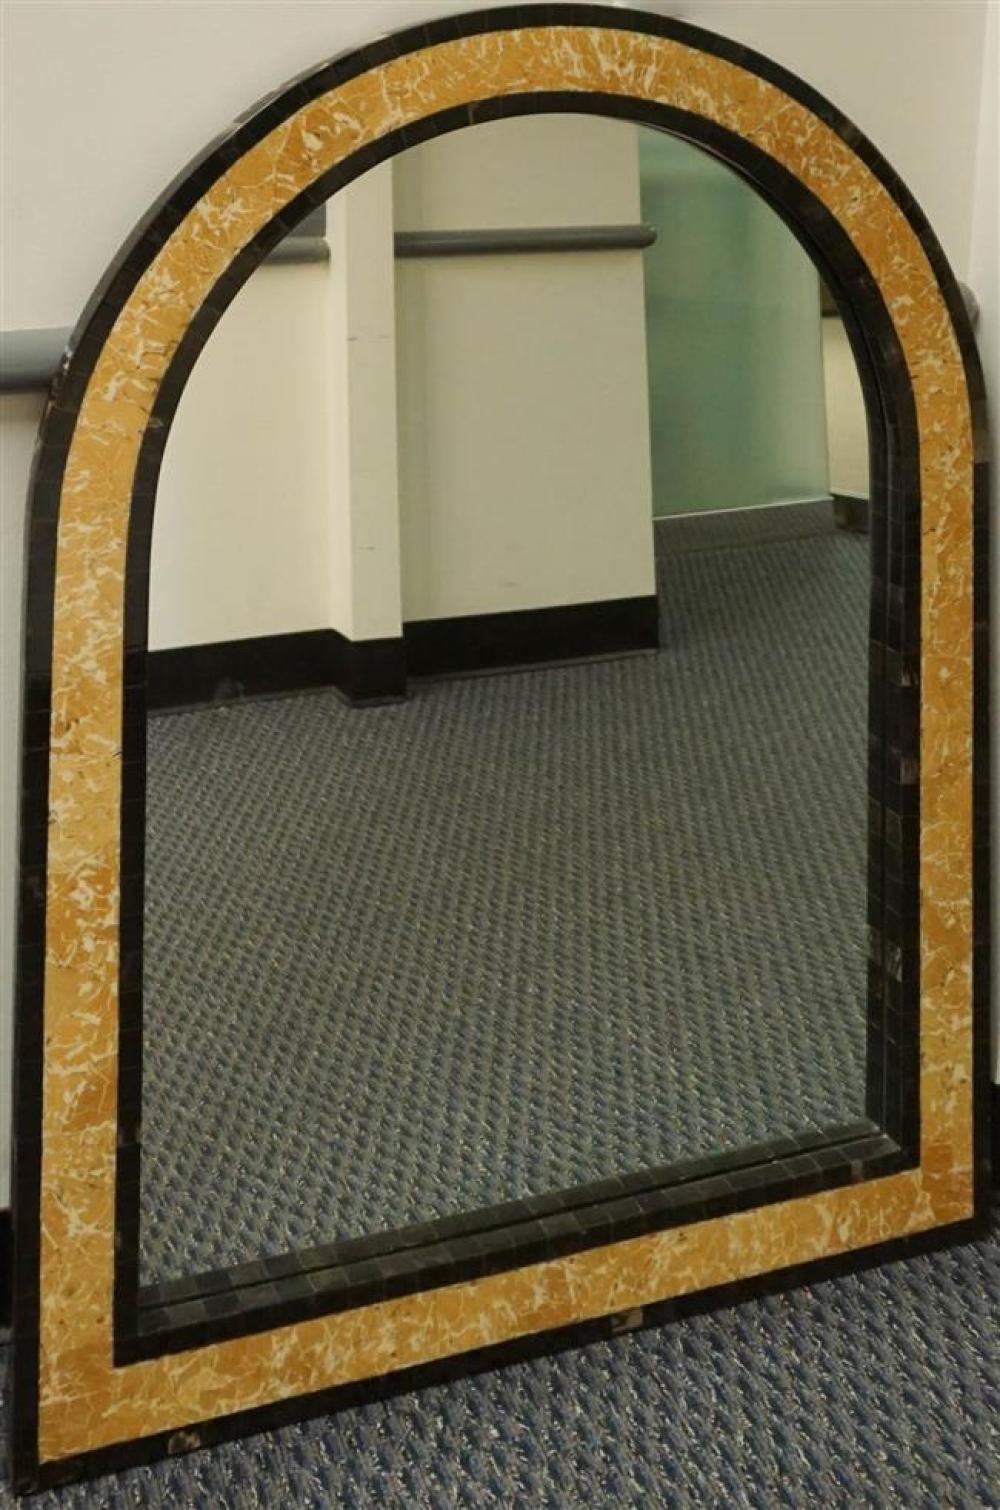 CONTEMPORARY DECORATED FRAME MIRROR